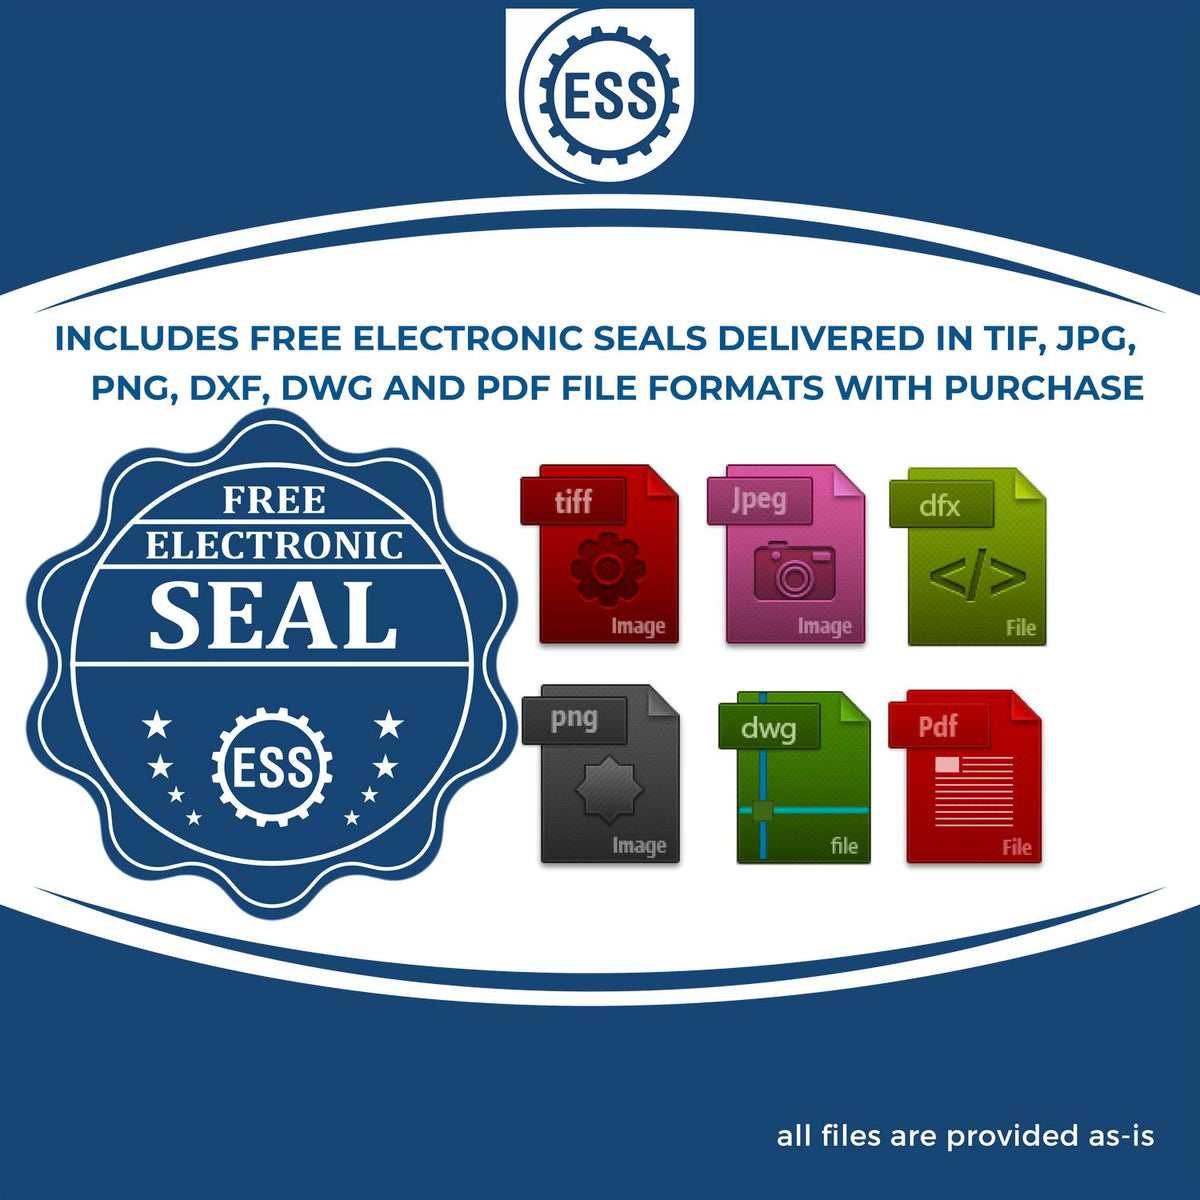 An infographic for the free electronic seal for the Handheld Delaware Professional Geologist Embosser illustrating the different file type icons such as DXF, DWG, TIF, JPG and PNG.